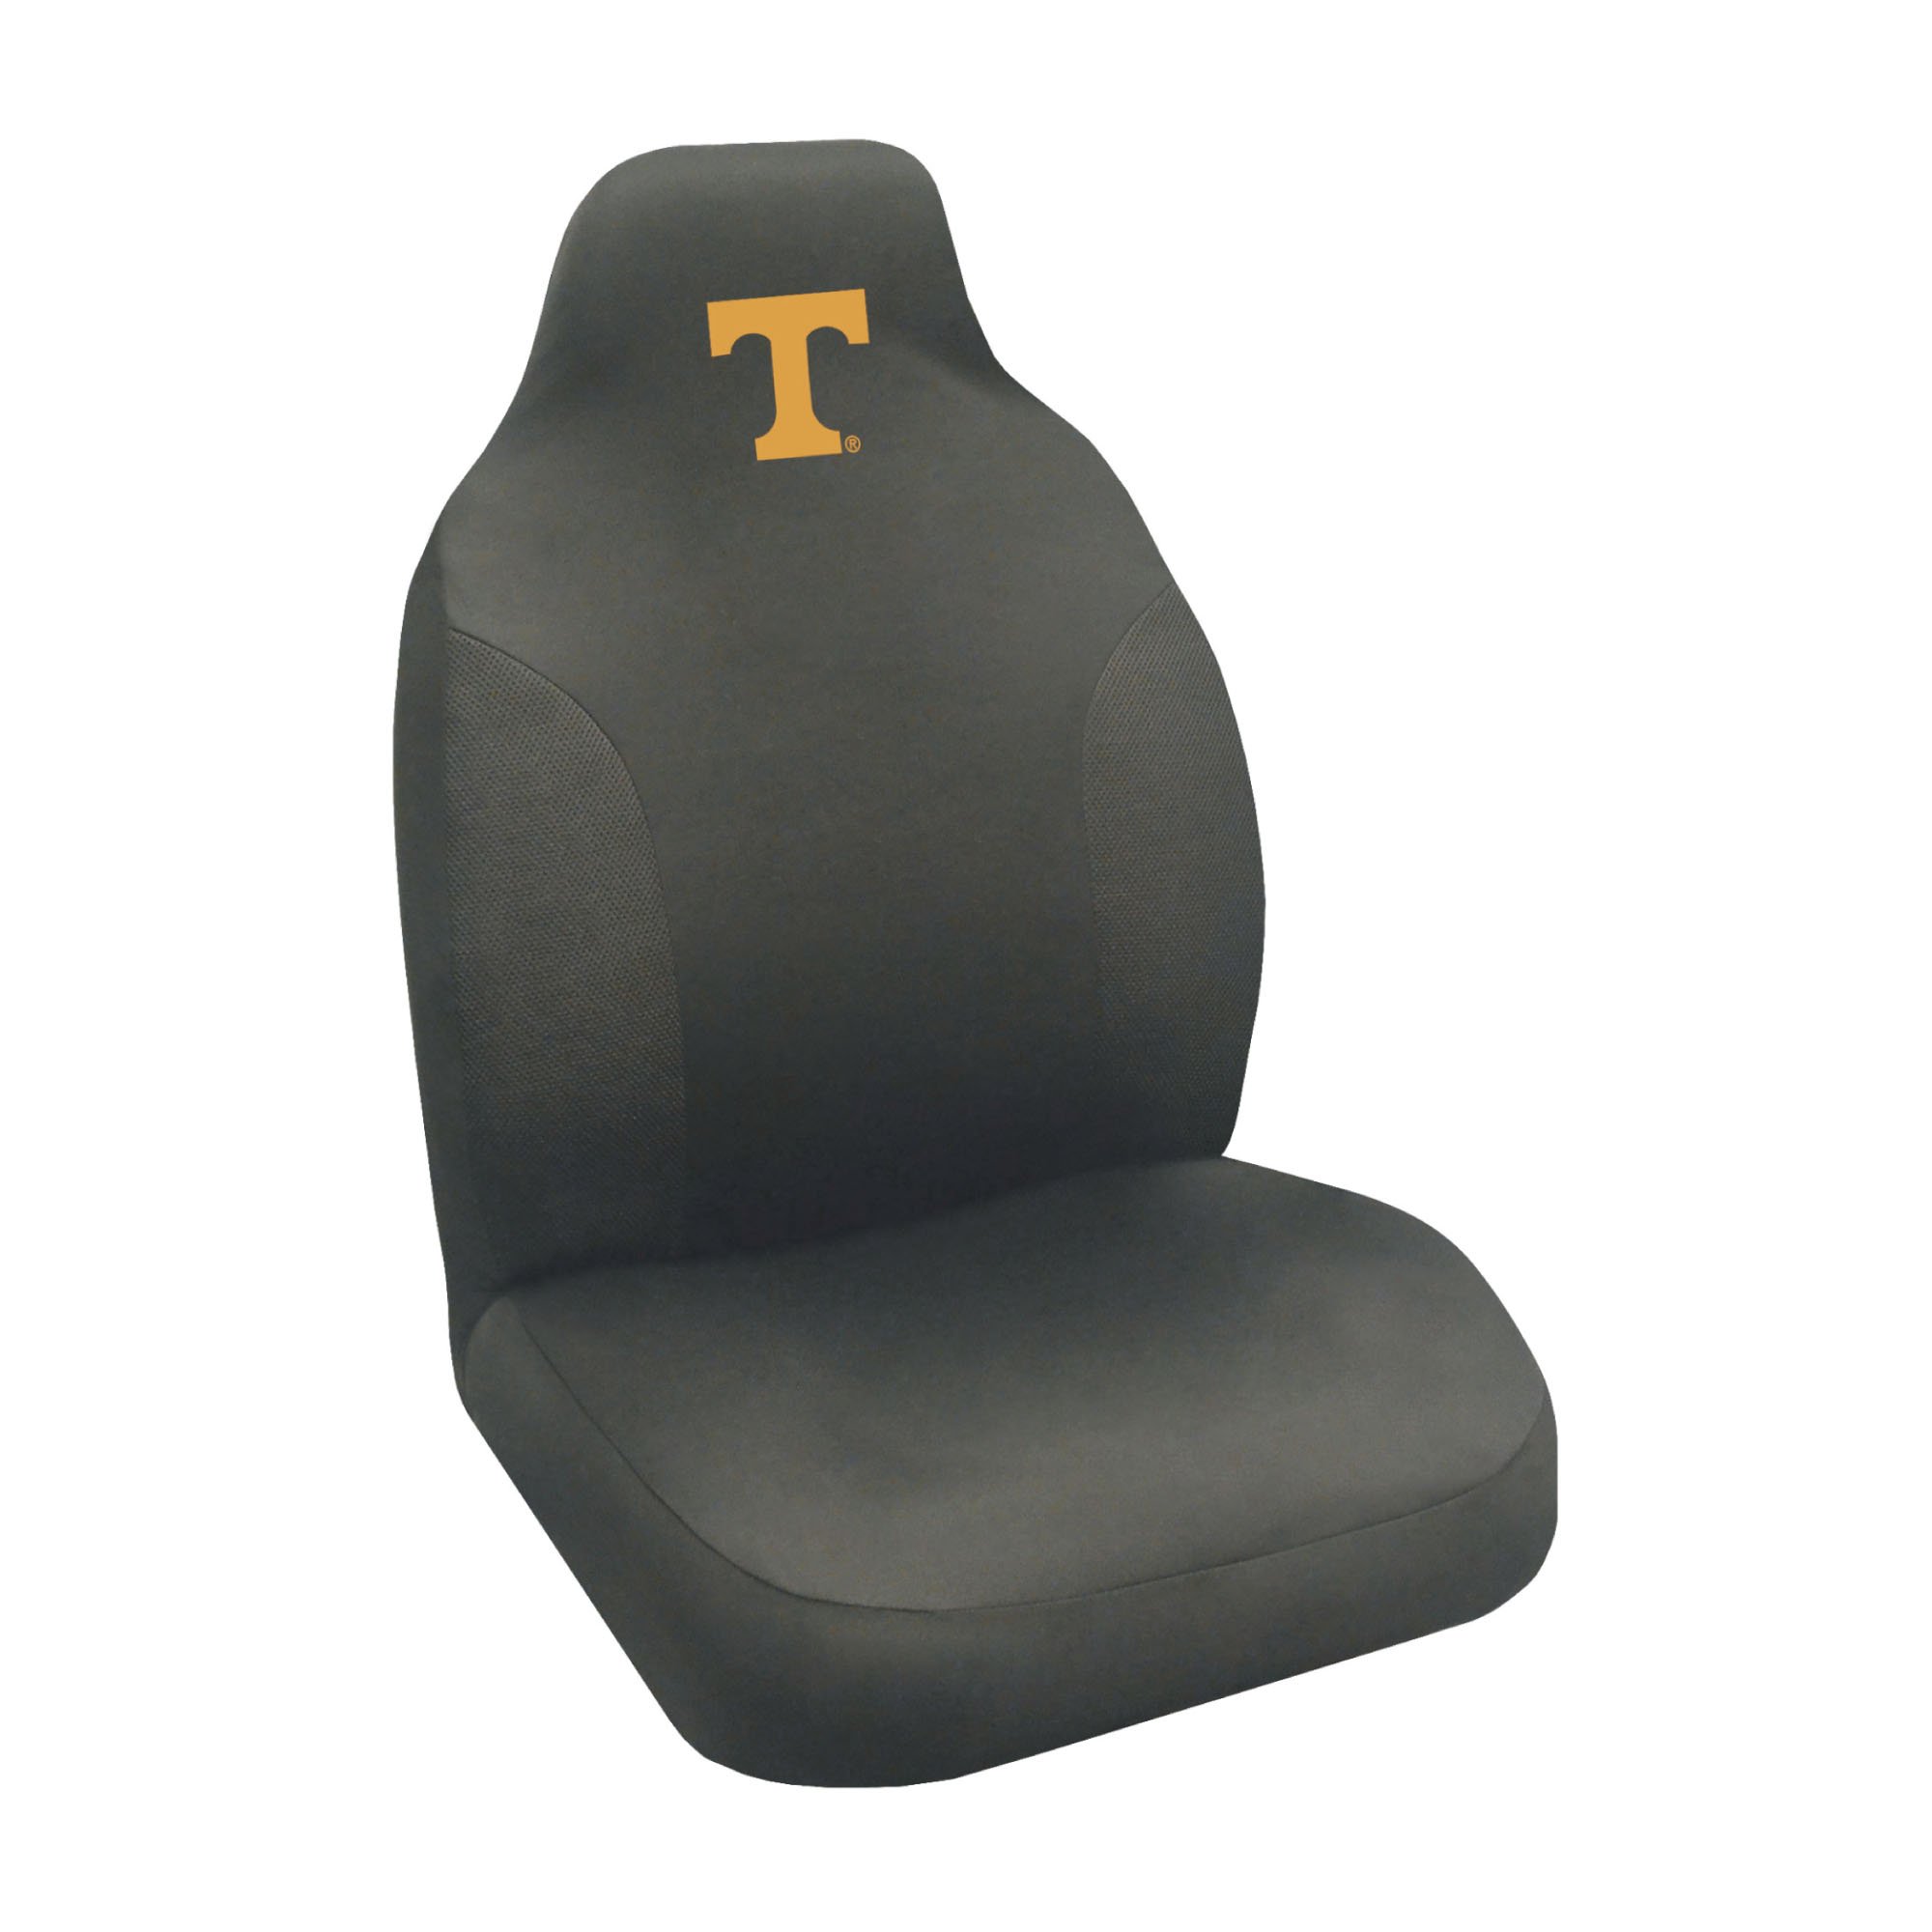 FANMATS 15059 Tennessee Volunteers Embroidered Seat Cover